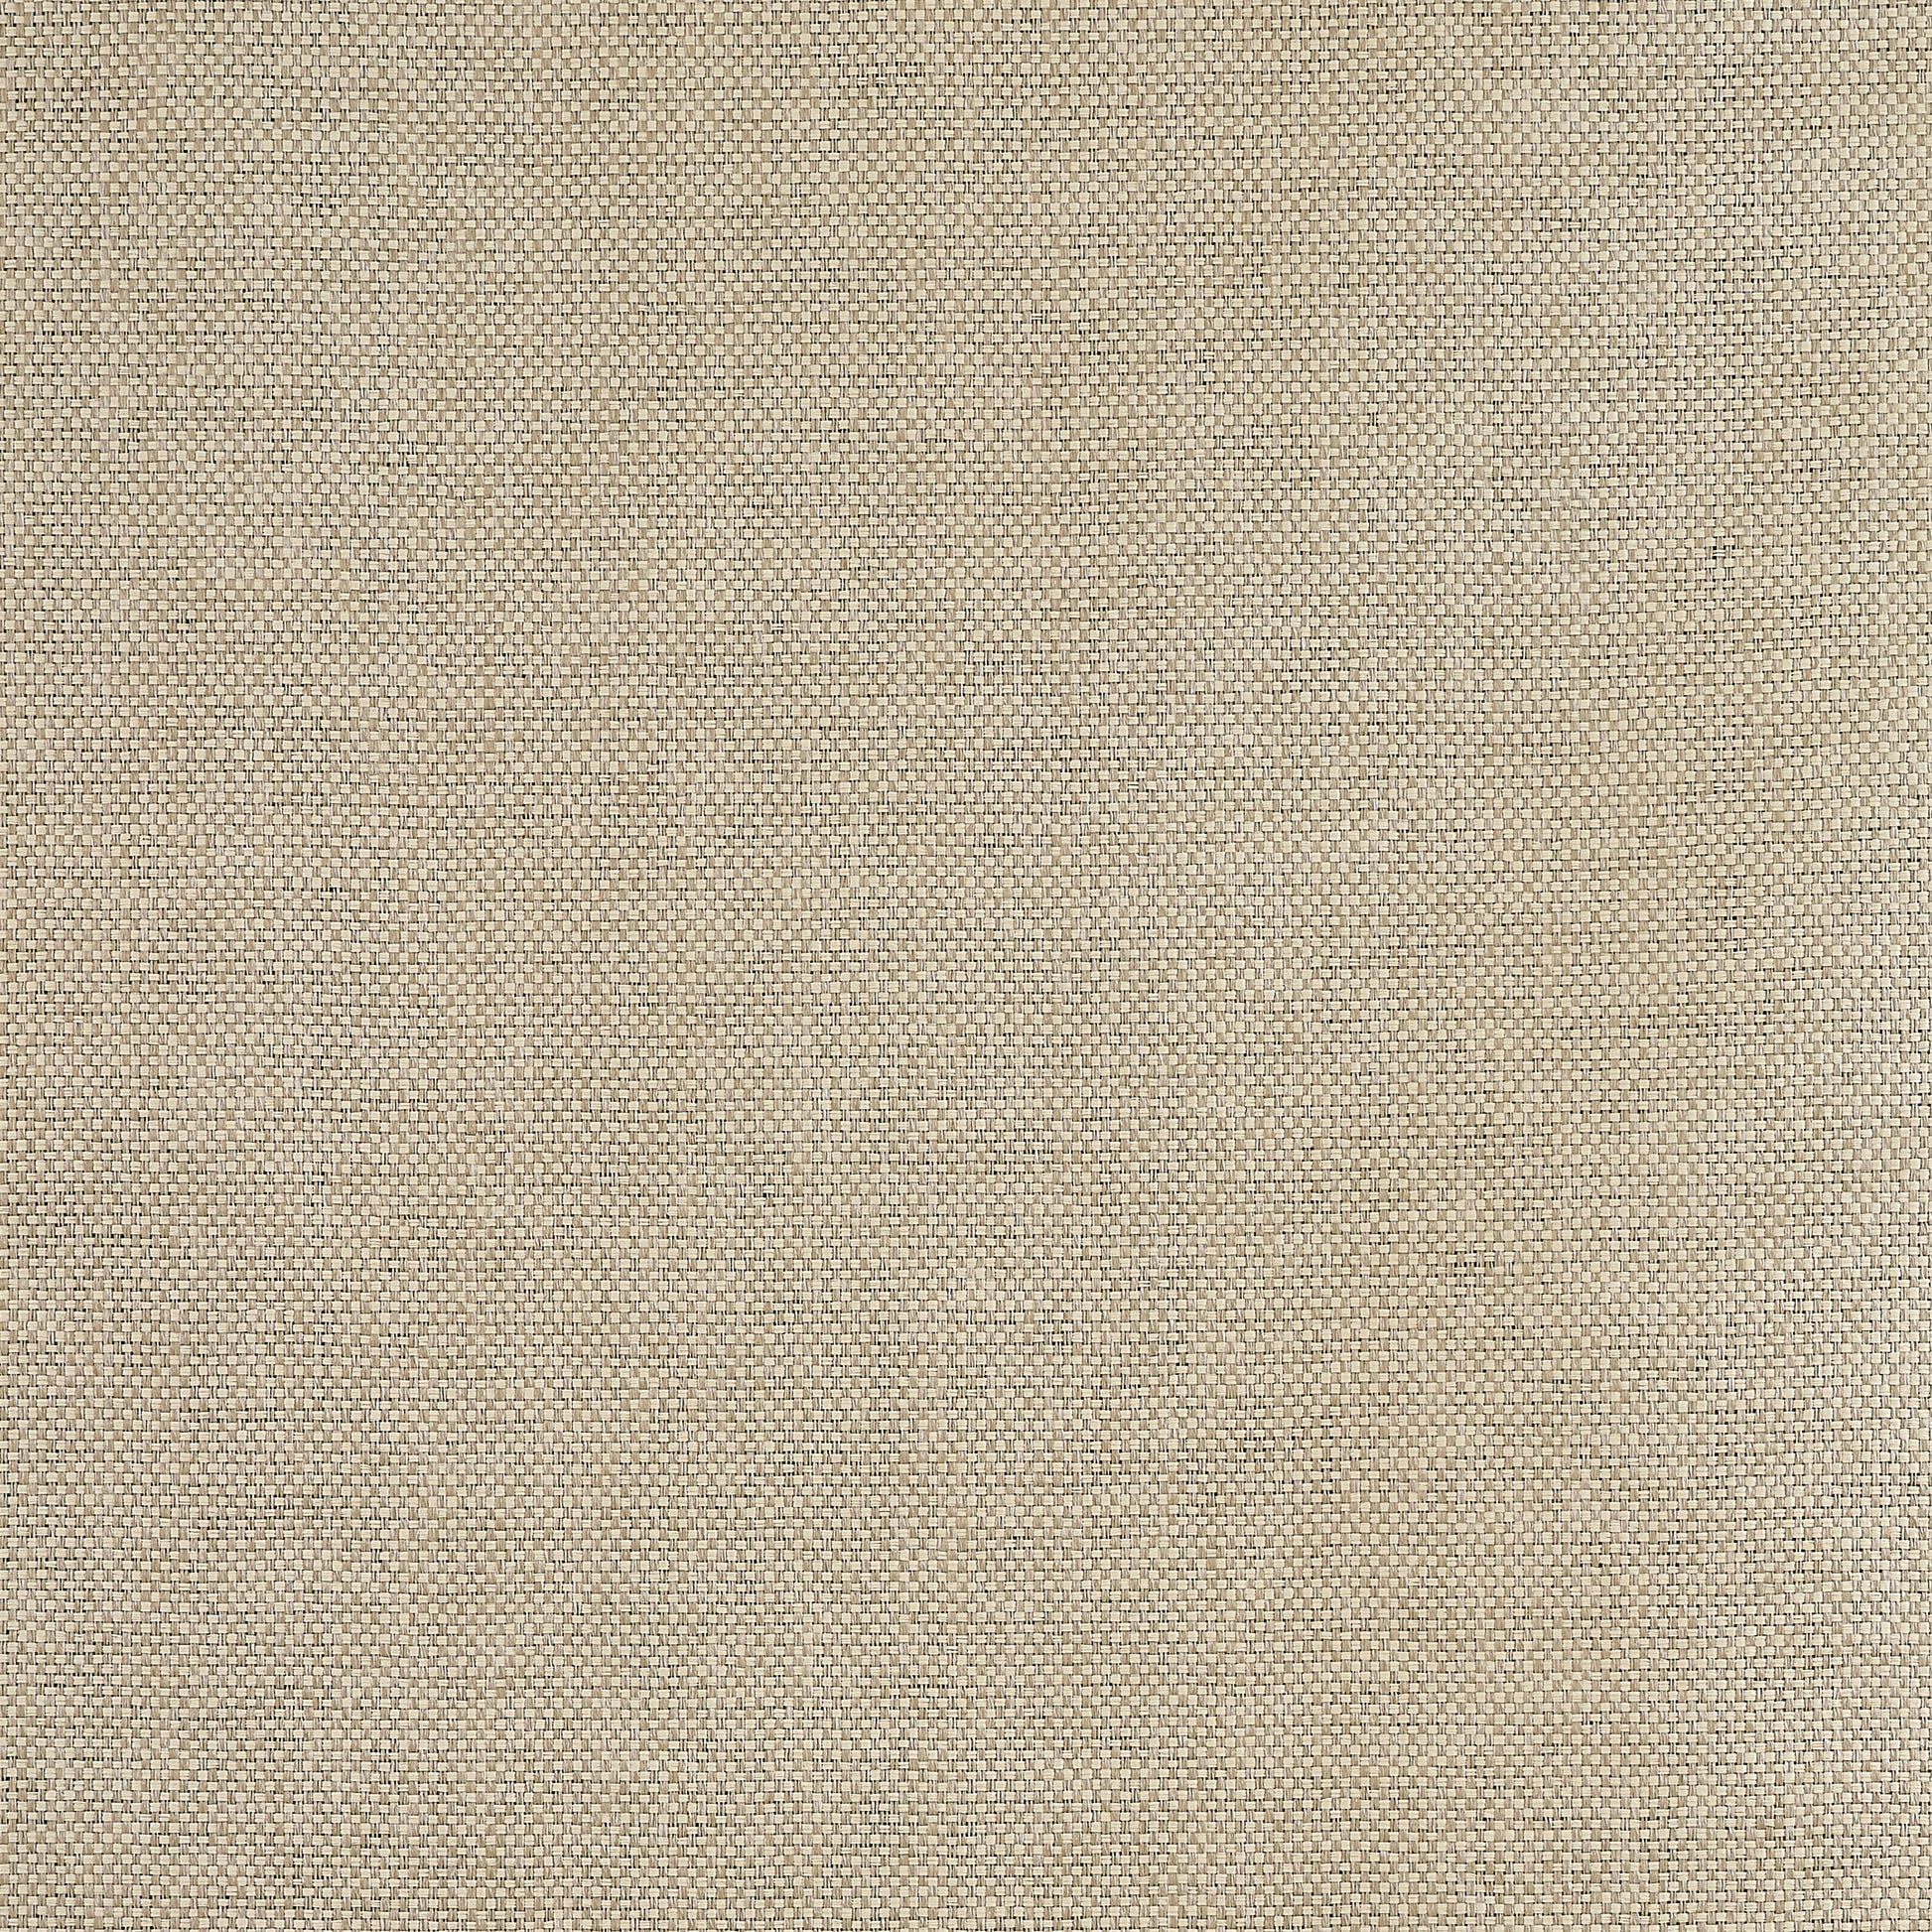 Purchase Thibaut Wallpaper SKU T19689 pattern name Clarkson Weave color Taupe. 